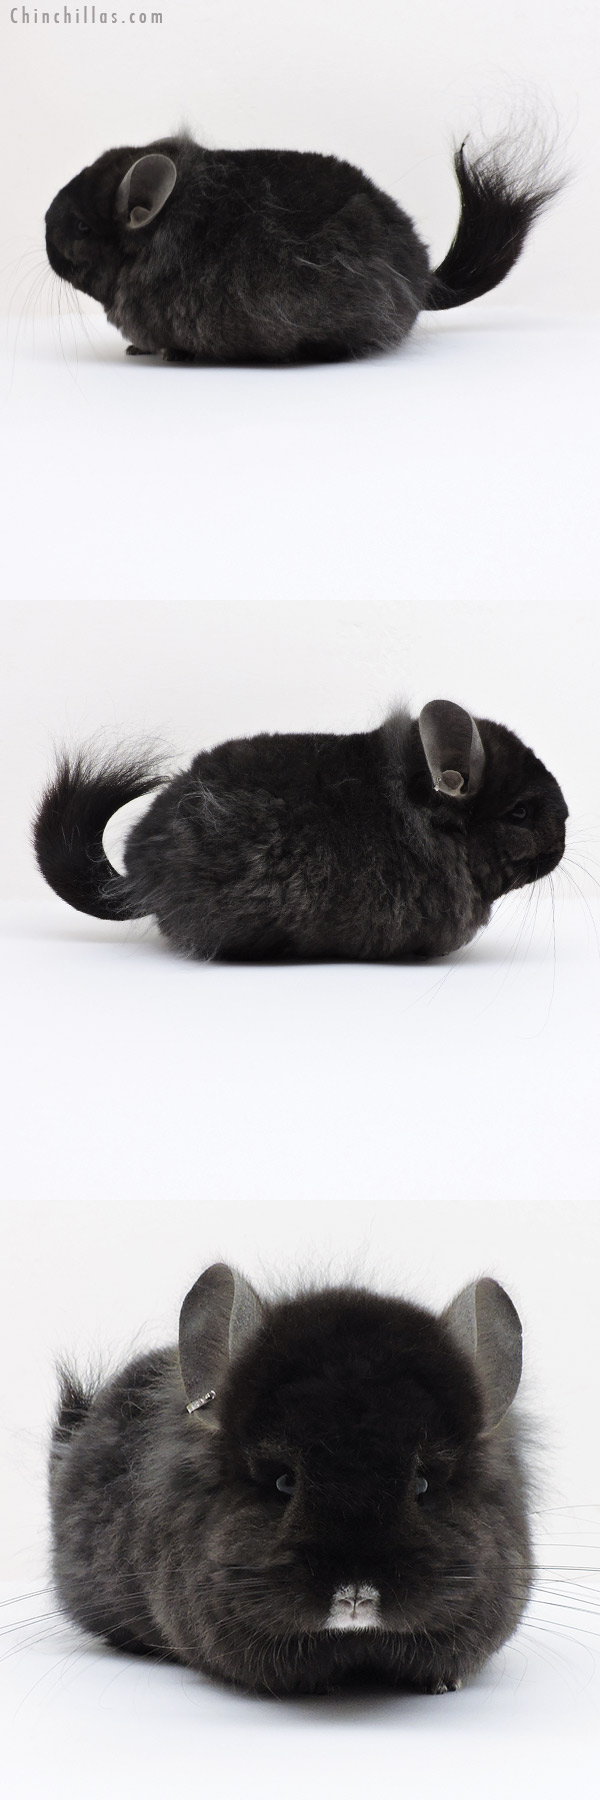 Chinchilla or related item offered for sale or export on Chinchillas.com - 19255 Exceptional Brevi Type Ebony  Royal Persian Angora Female Chinchilla